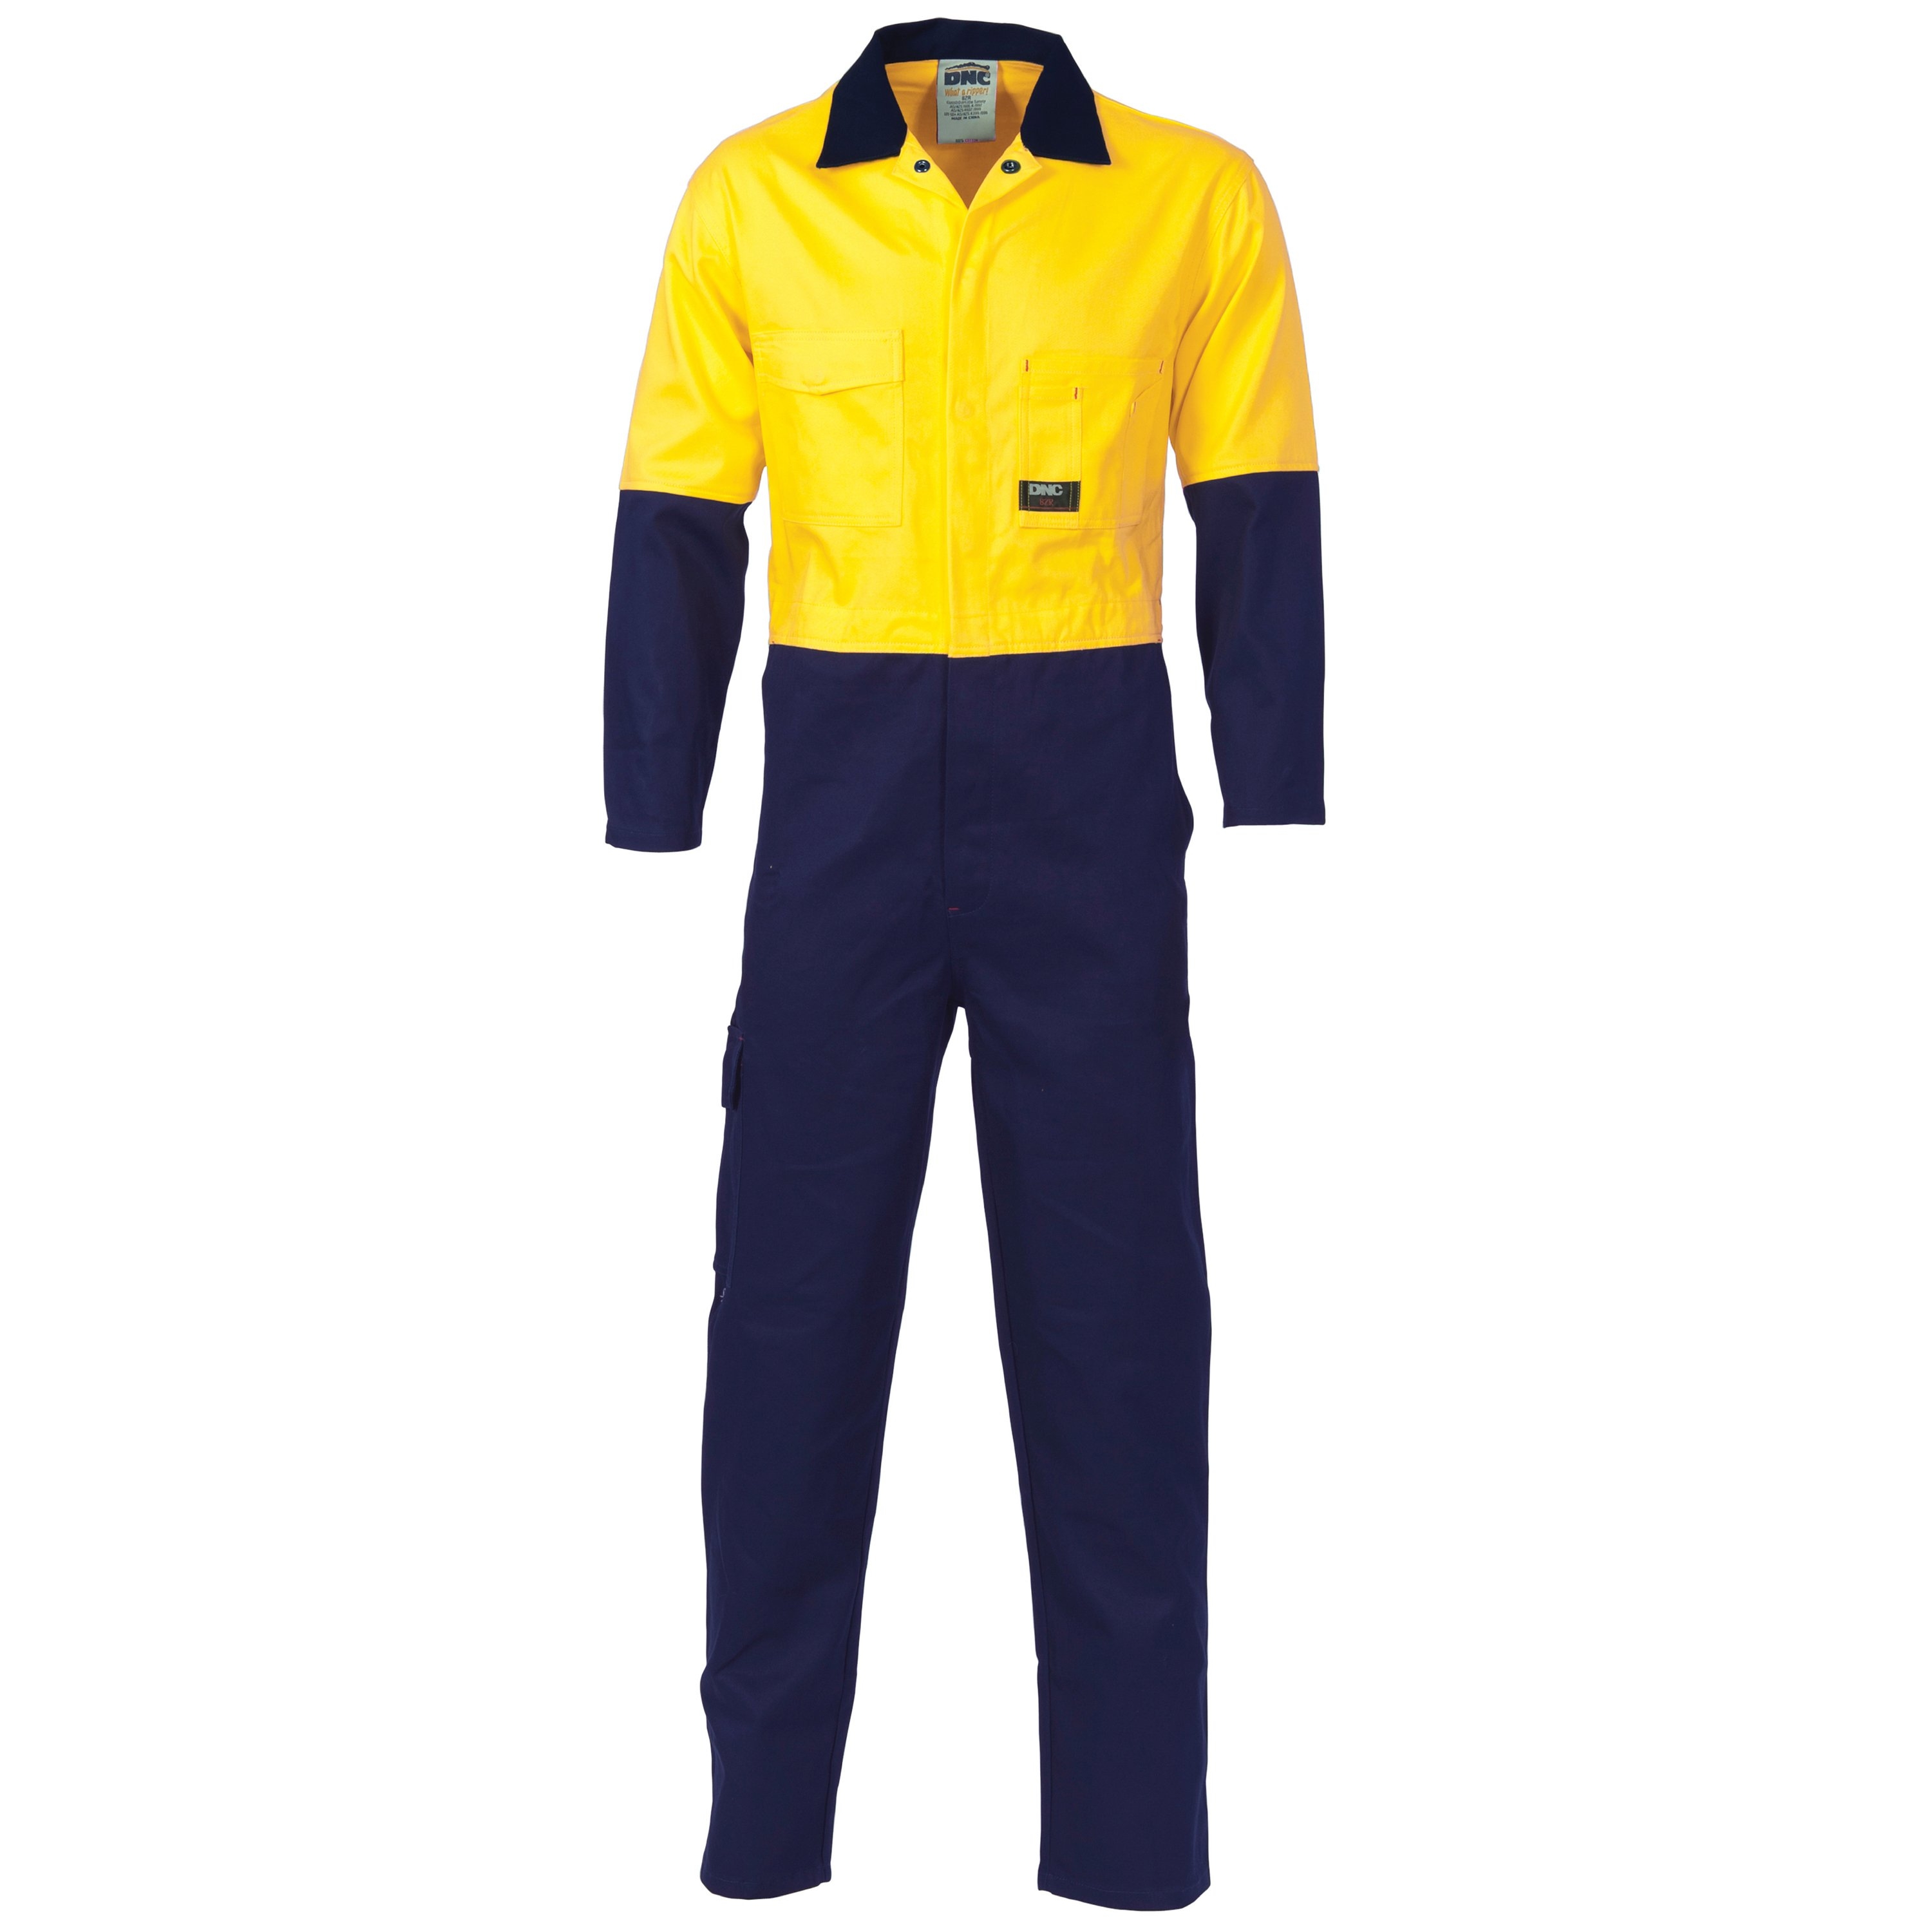 DNC HIVIS COOL BREEZE LIGHT WEIGHT COTTON DRILL COVERALL 190GSM 3852 2 TONE